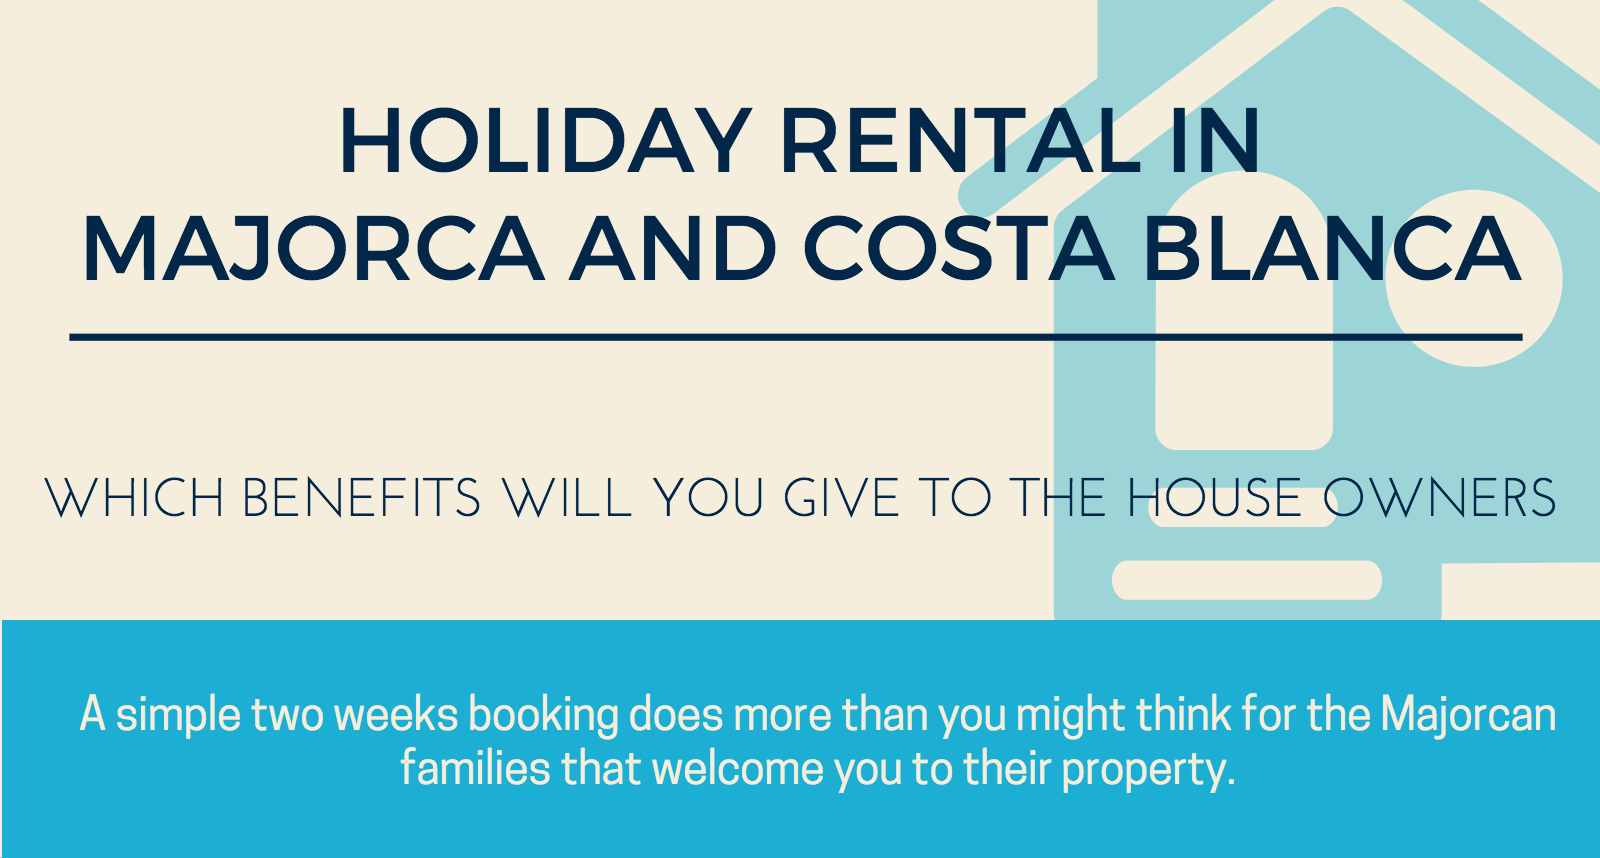 Benefits for owners: Holiday Rental in Mallorca and Costa Blanca